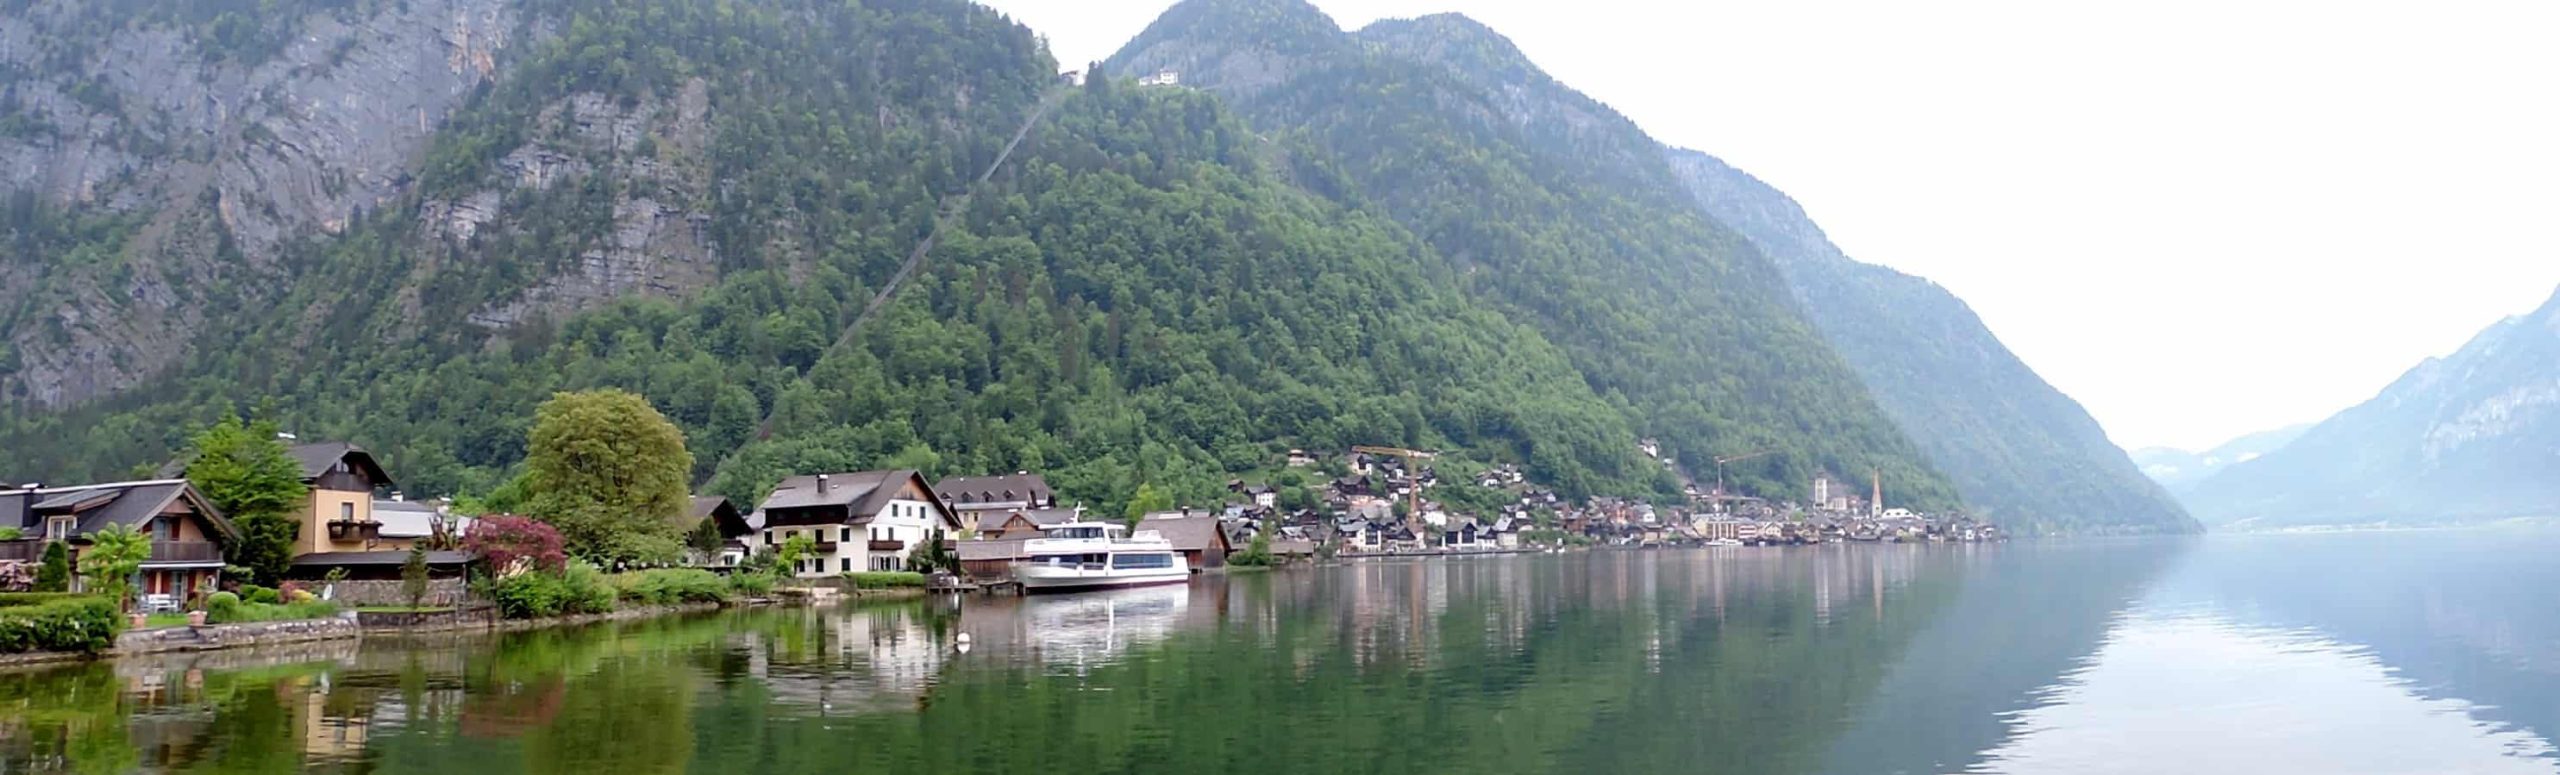 You are currently viewing Mon histoire d’amour avec Hallstatt